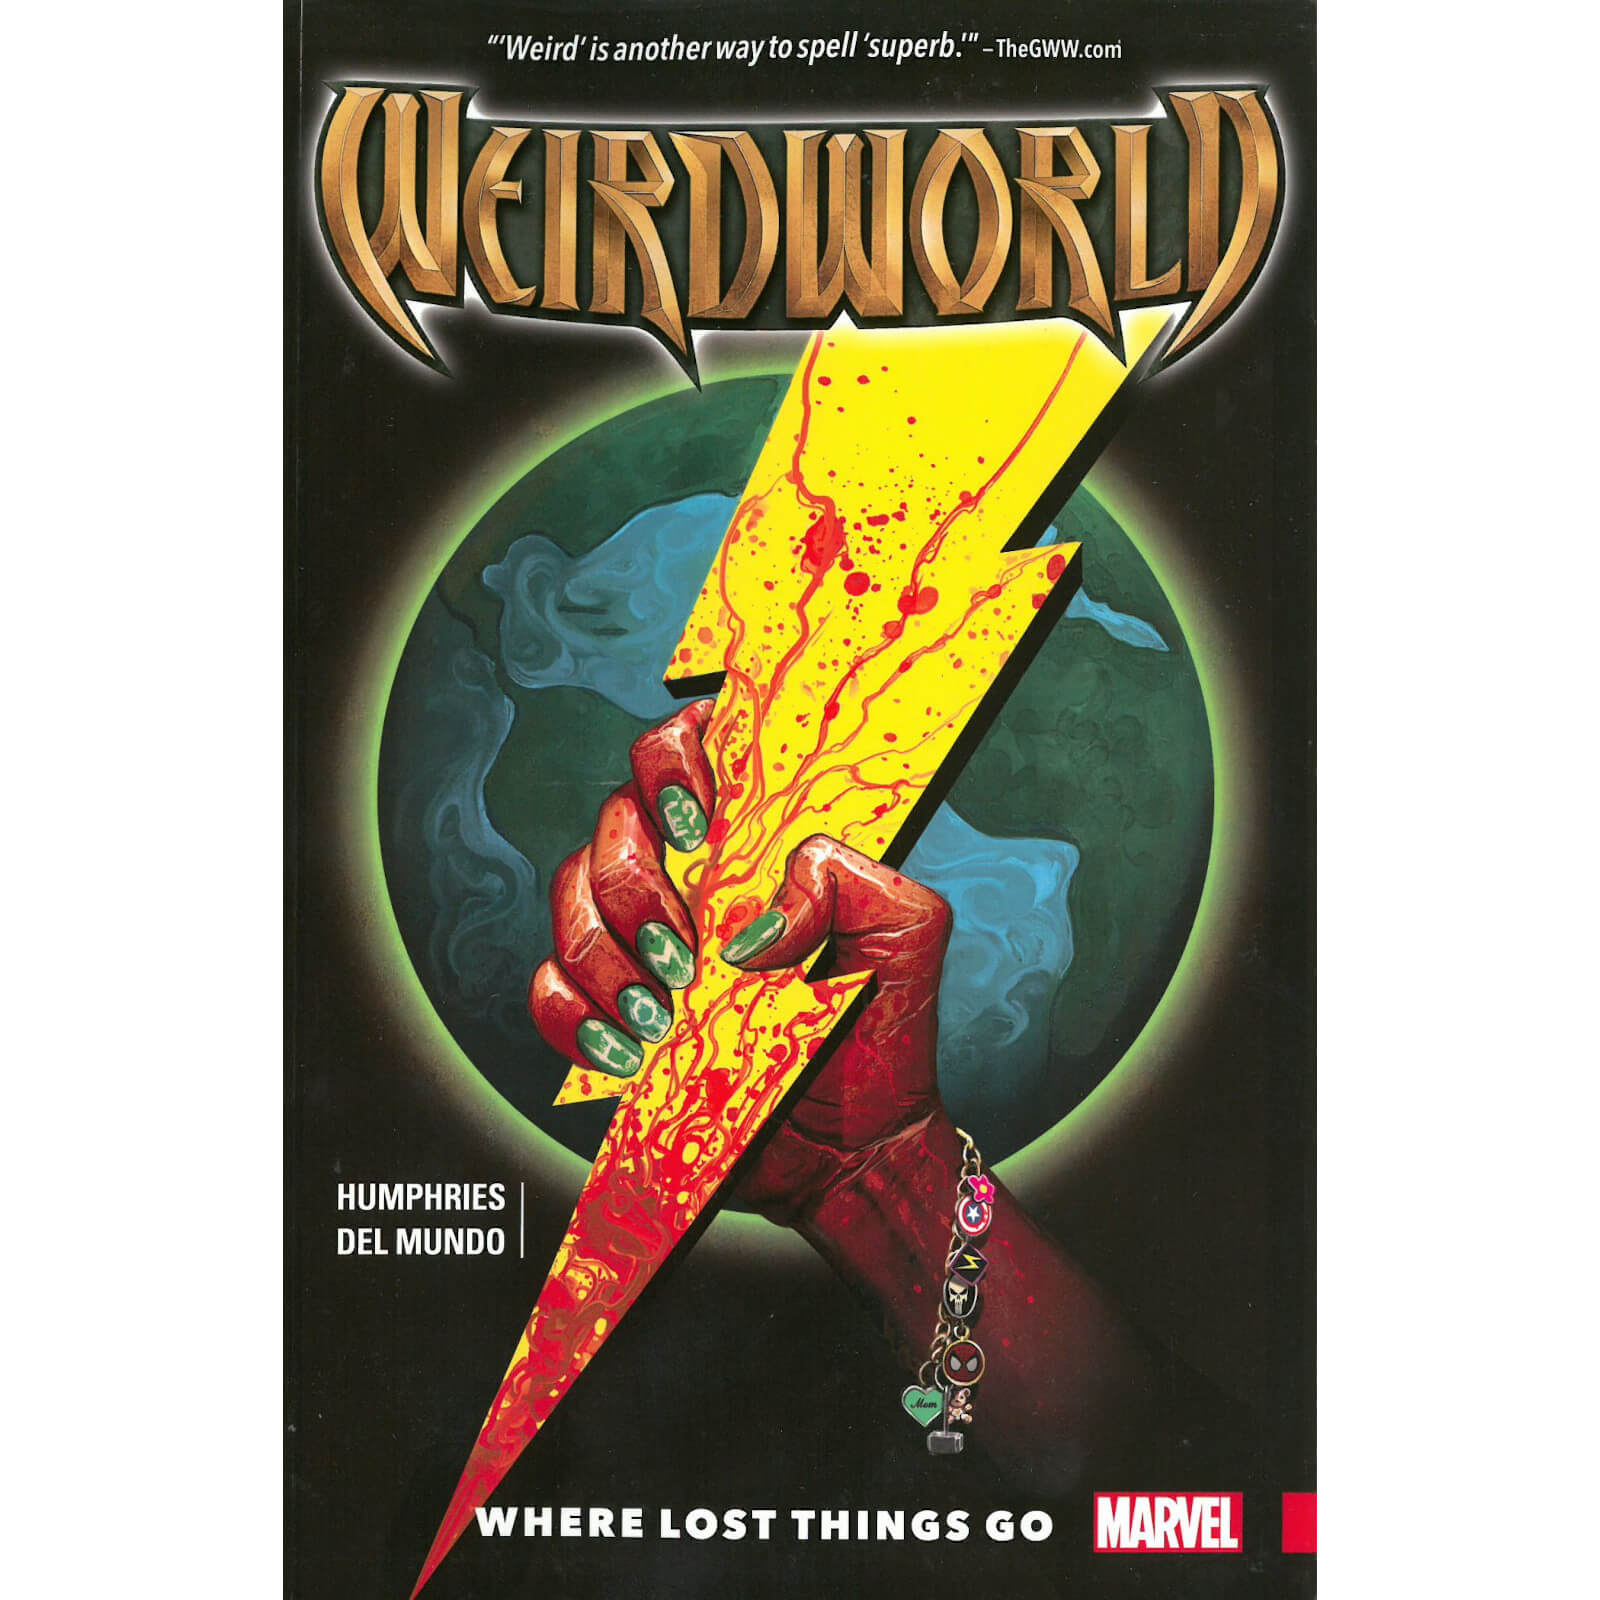 Marvel Comics Weirdworld Trade Paperback Vol 01 Where Lost Things Go Graphic Novel